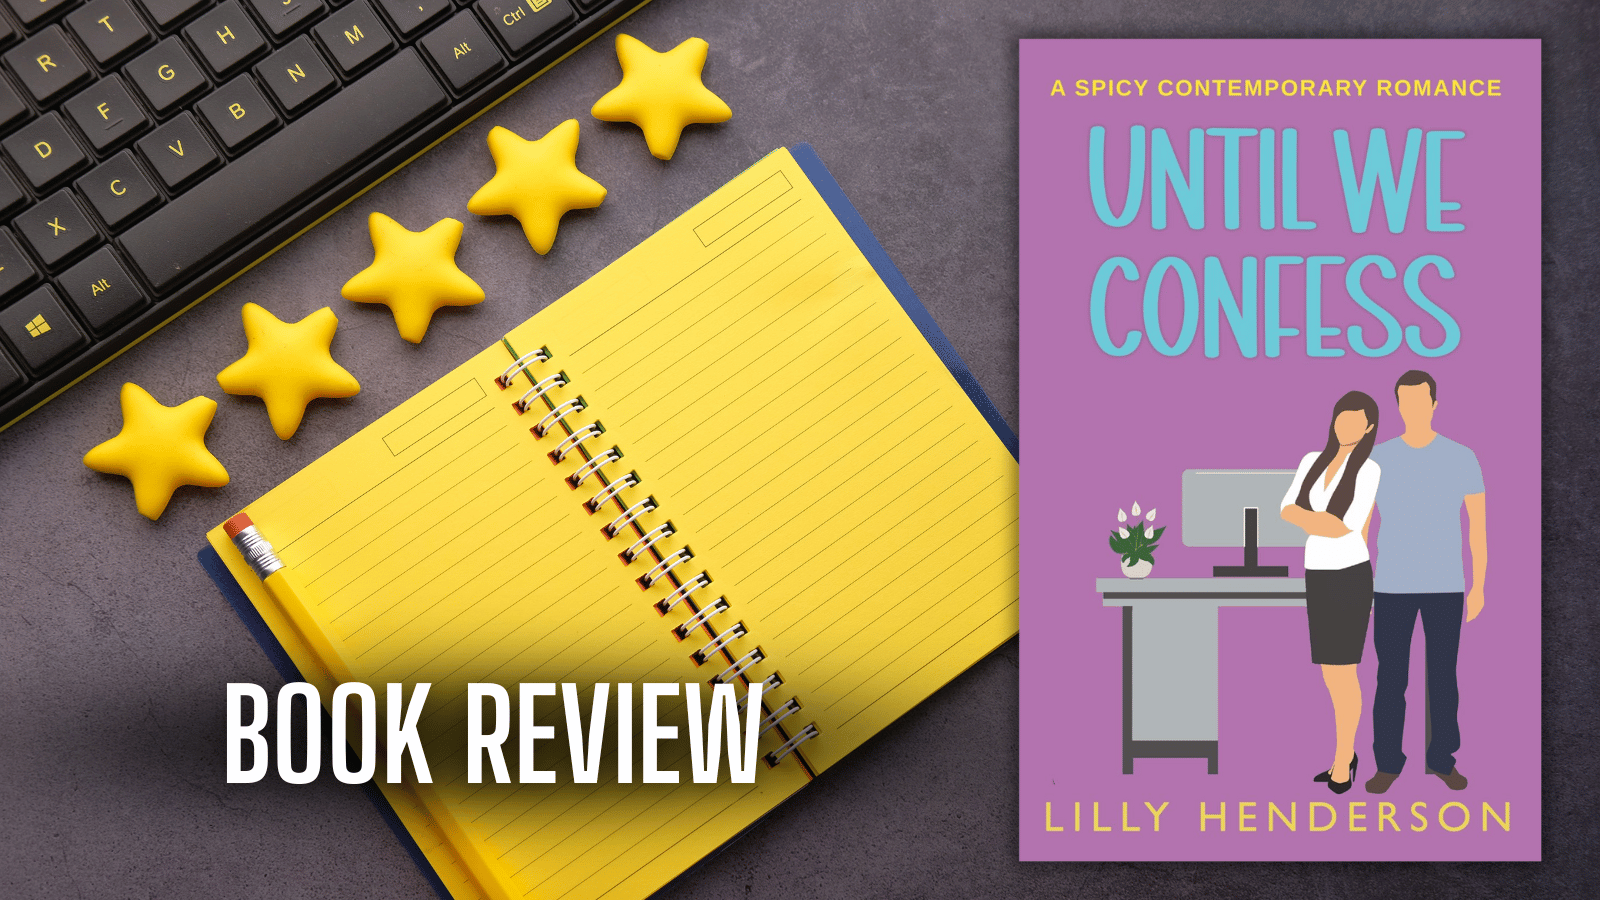 Until We Confess by Lilly Henderson is a healthy romance with a solid plotline, a strong heroine, and a decent book boyfriend.